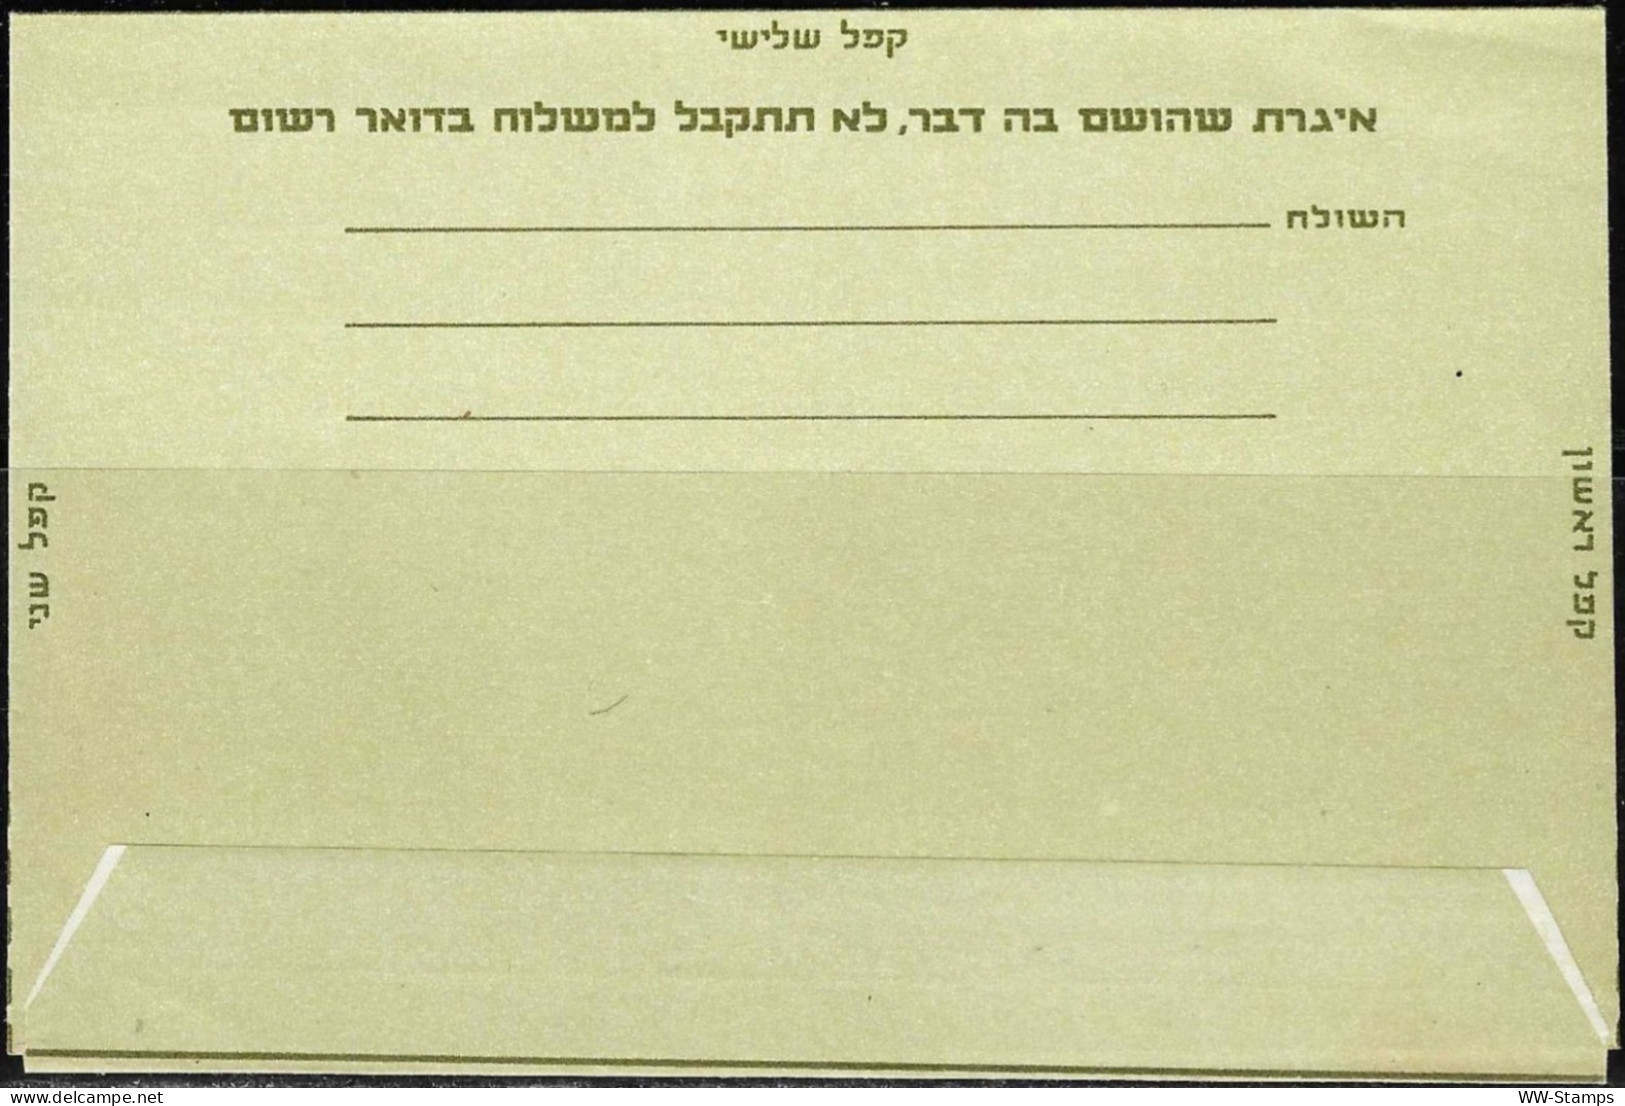 Israel 1966 Mint Postal Letter Sheet Inland Use 15A Stag First Day Cancel [ILT1247] - Covers & Documents